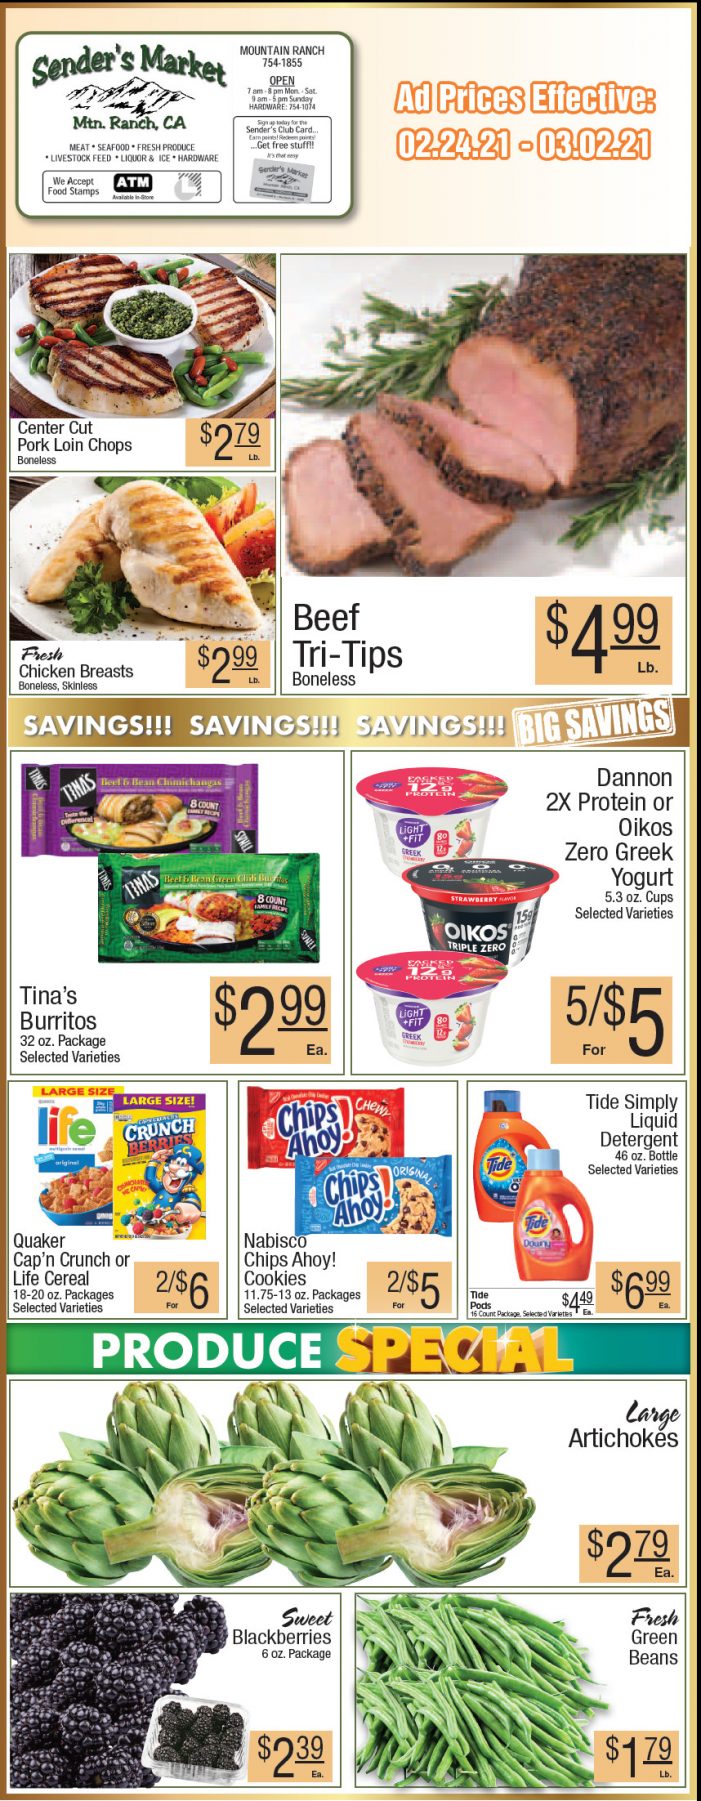 Sender’s Market’s Weekly Ad & Grocery Specials Through March 2nd.  Shop Local & Save!